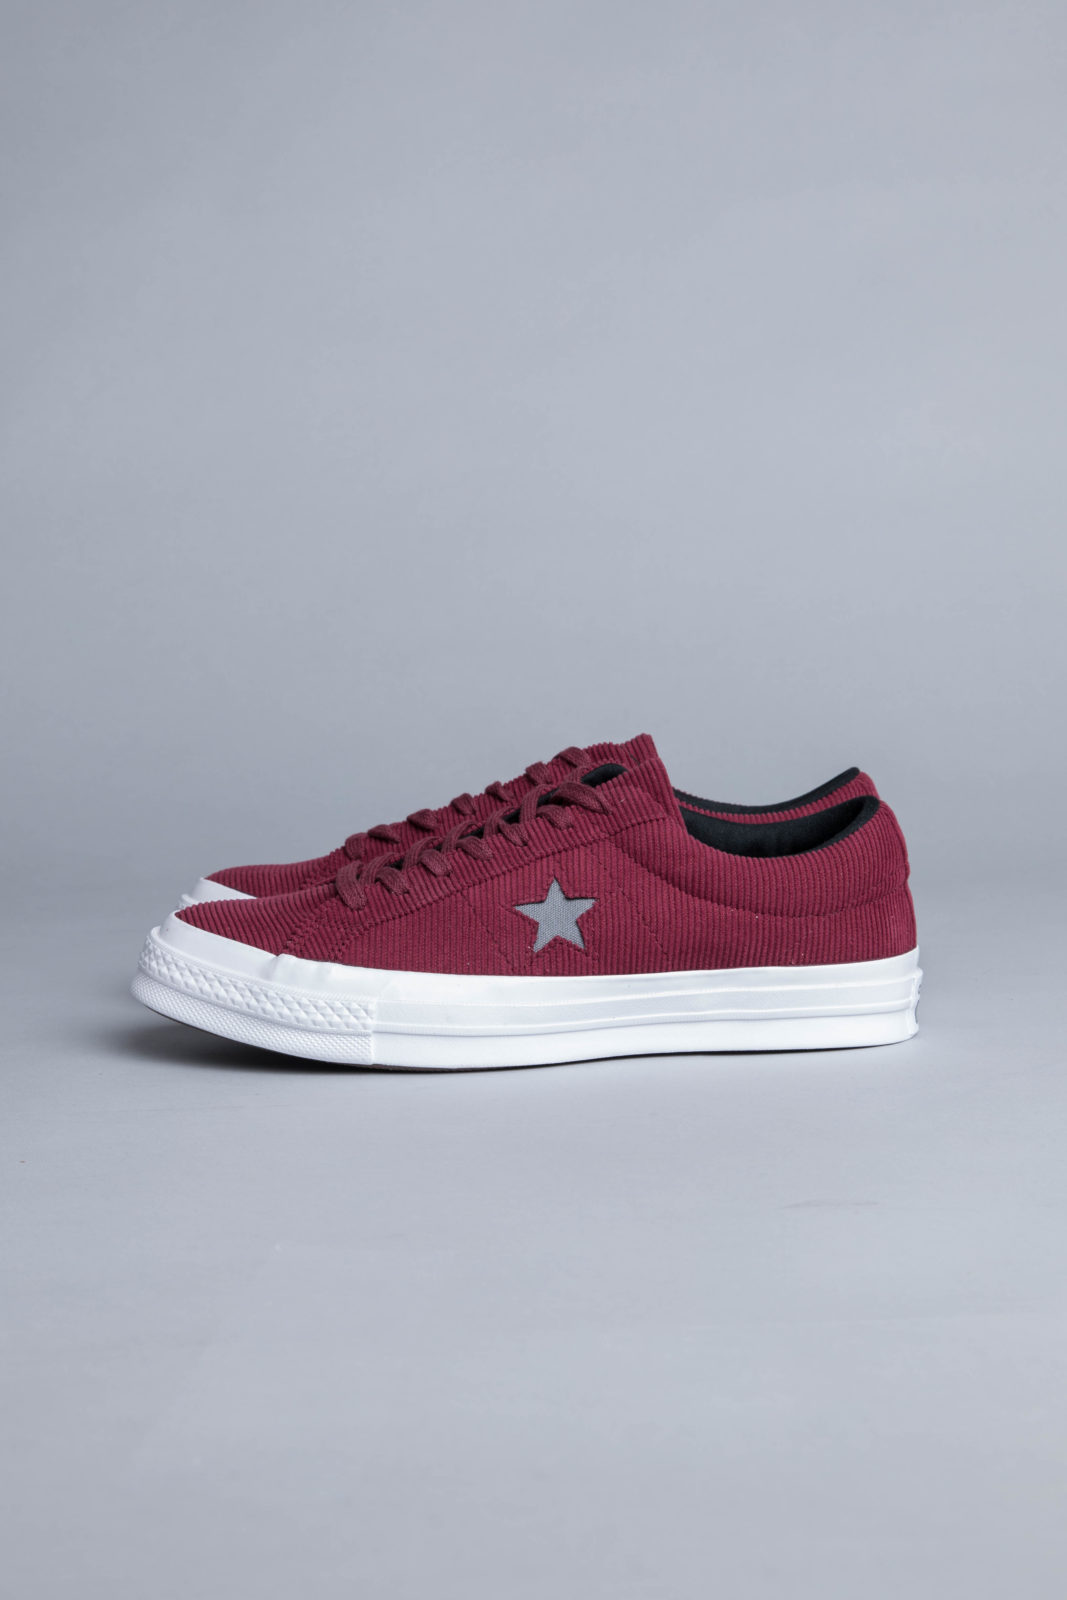 converse with a star